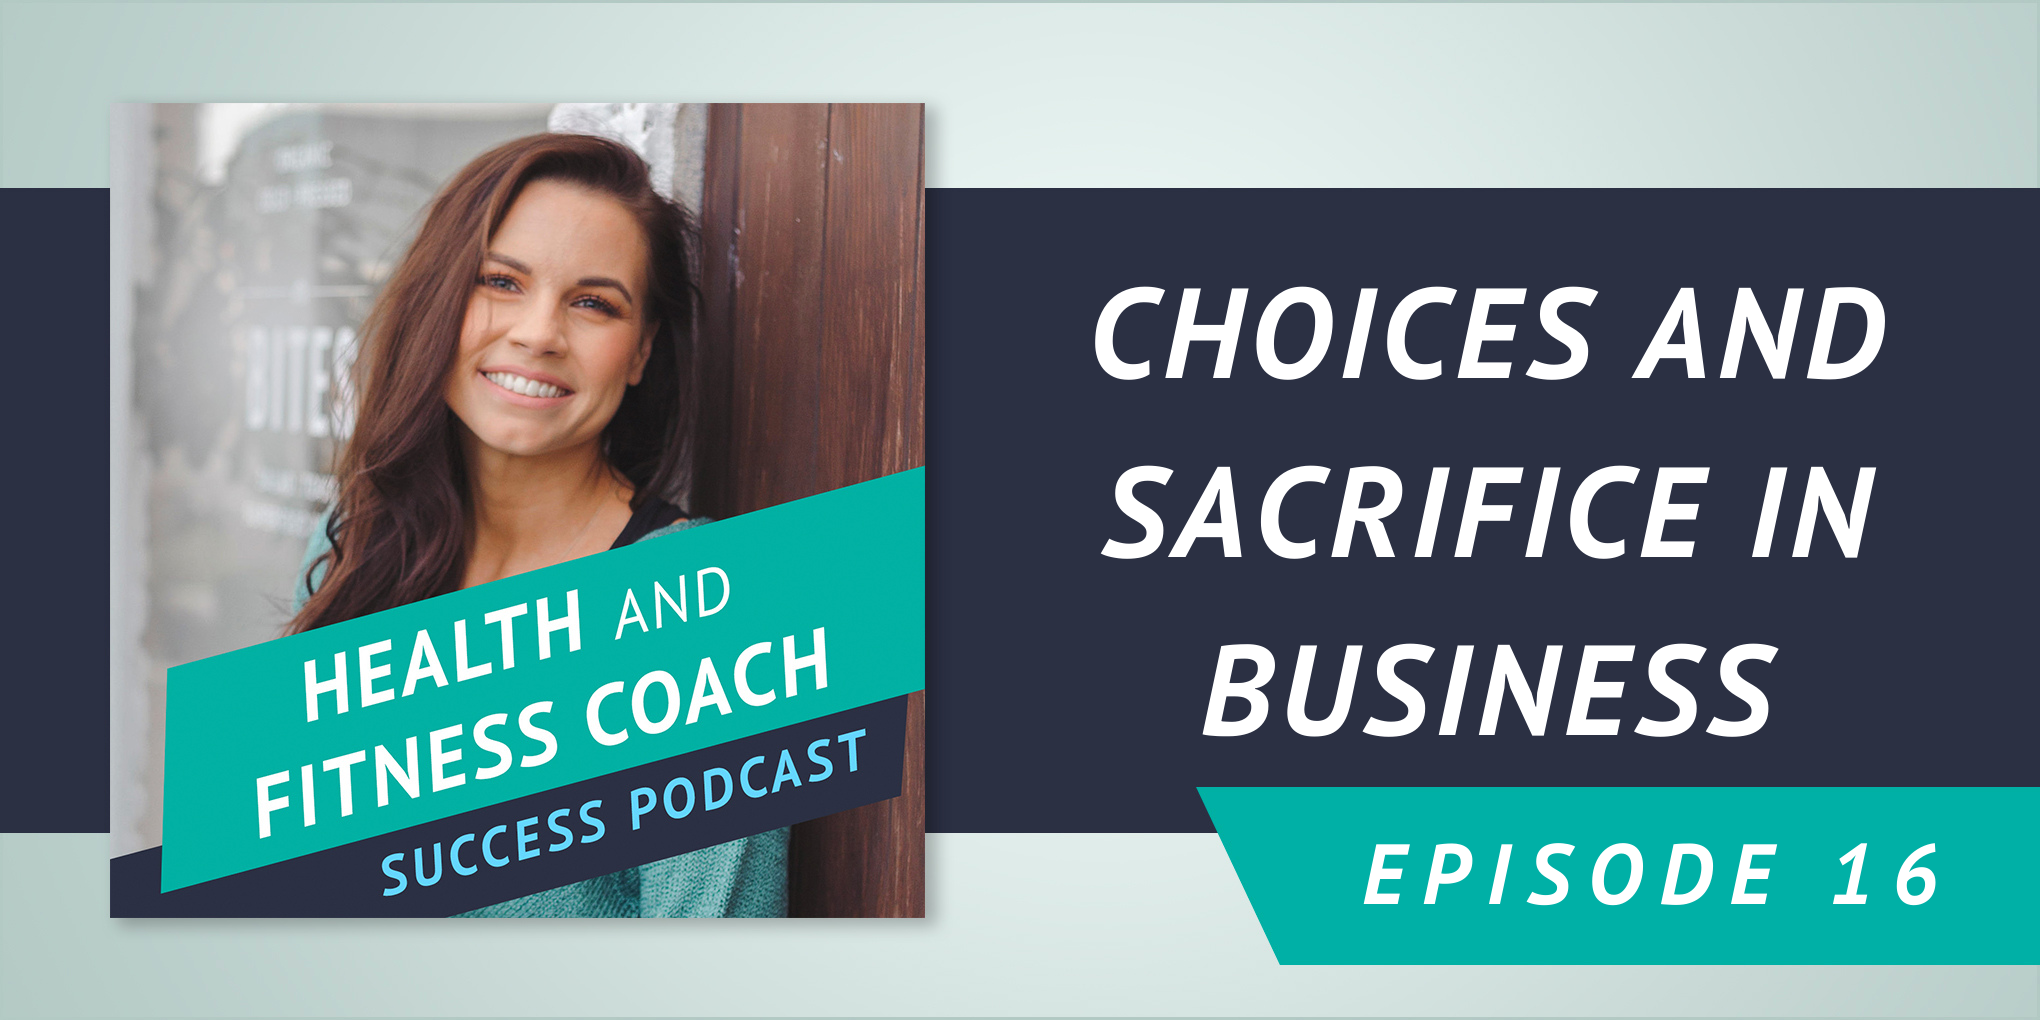 Choices and Sacrifice in Business